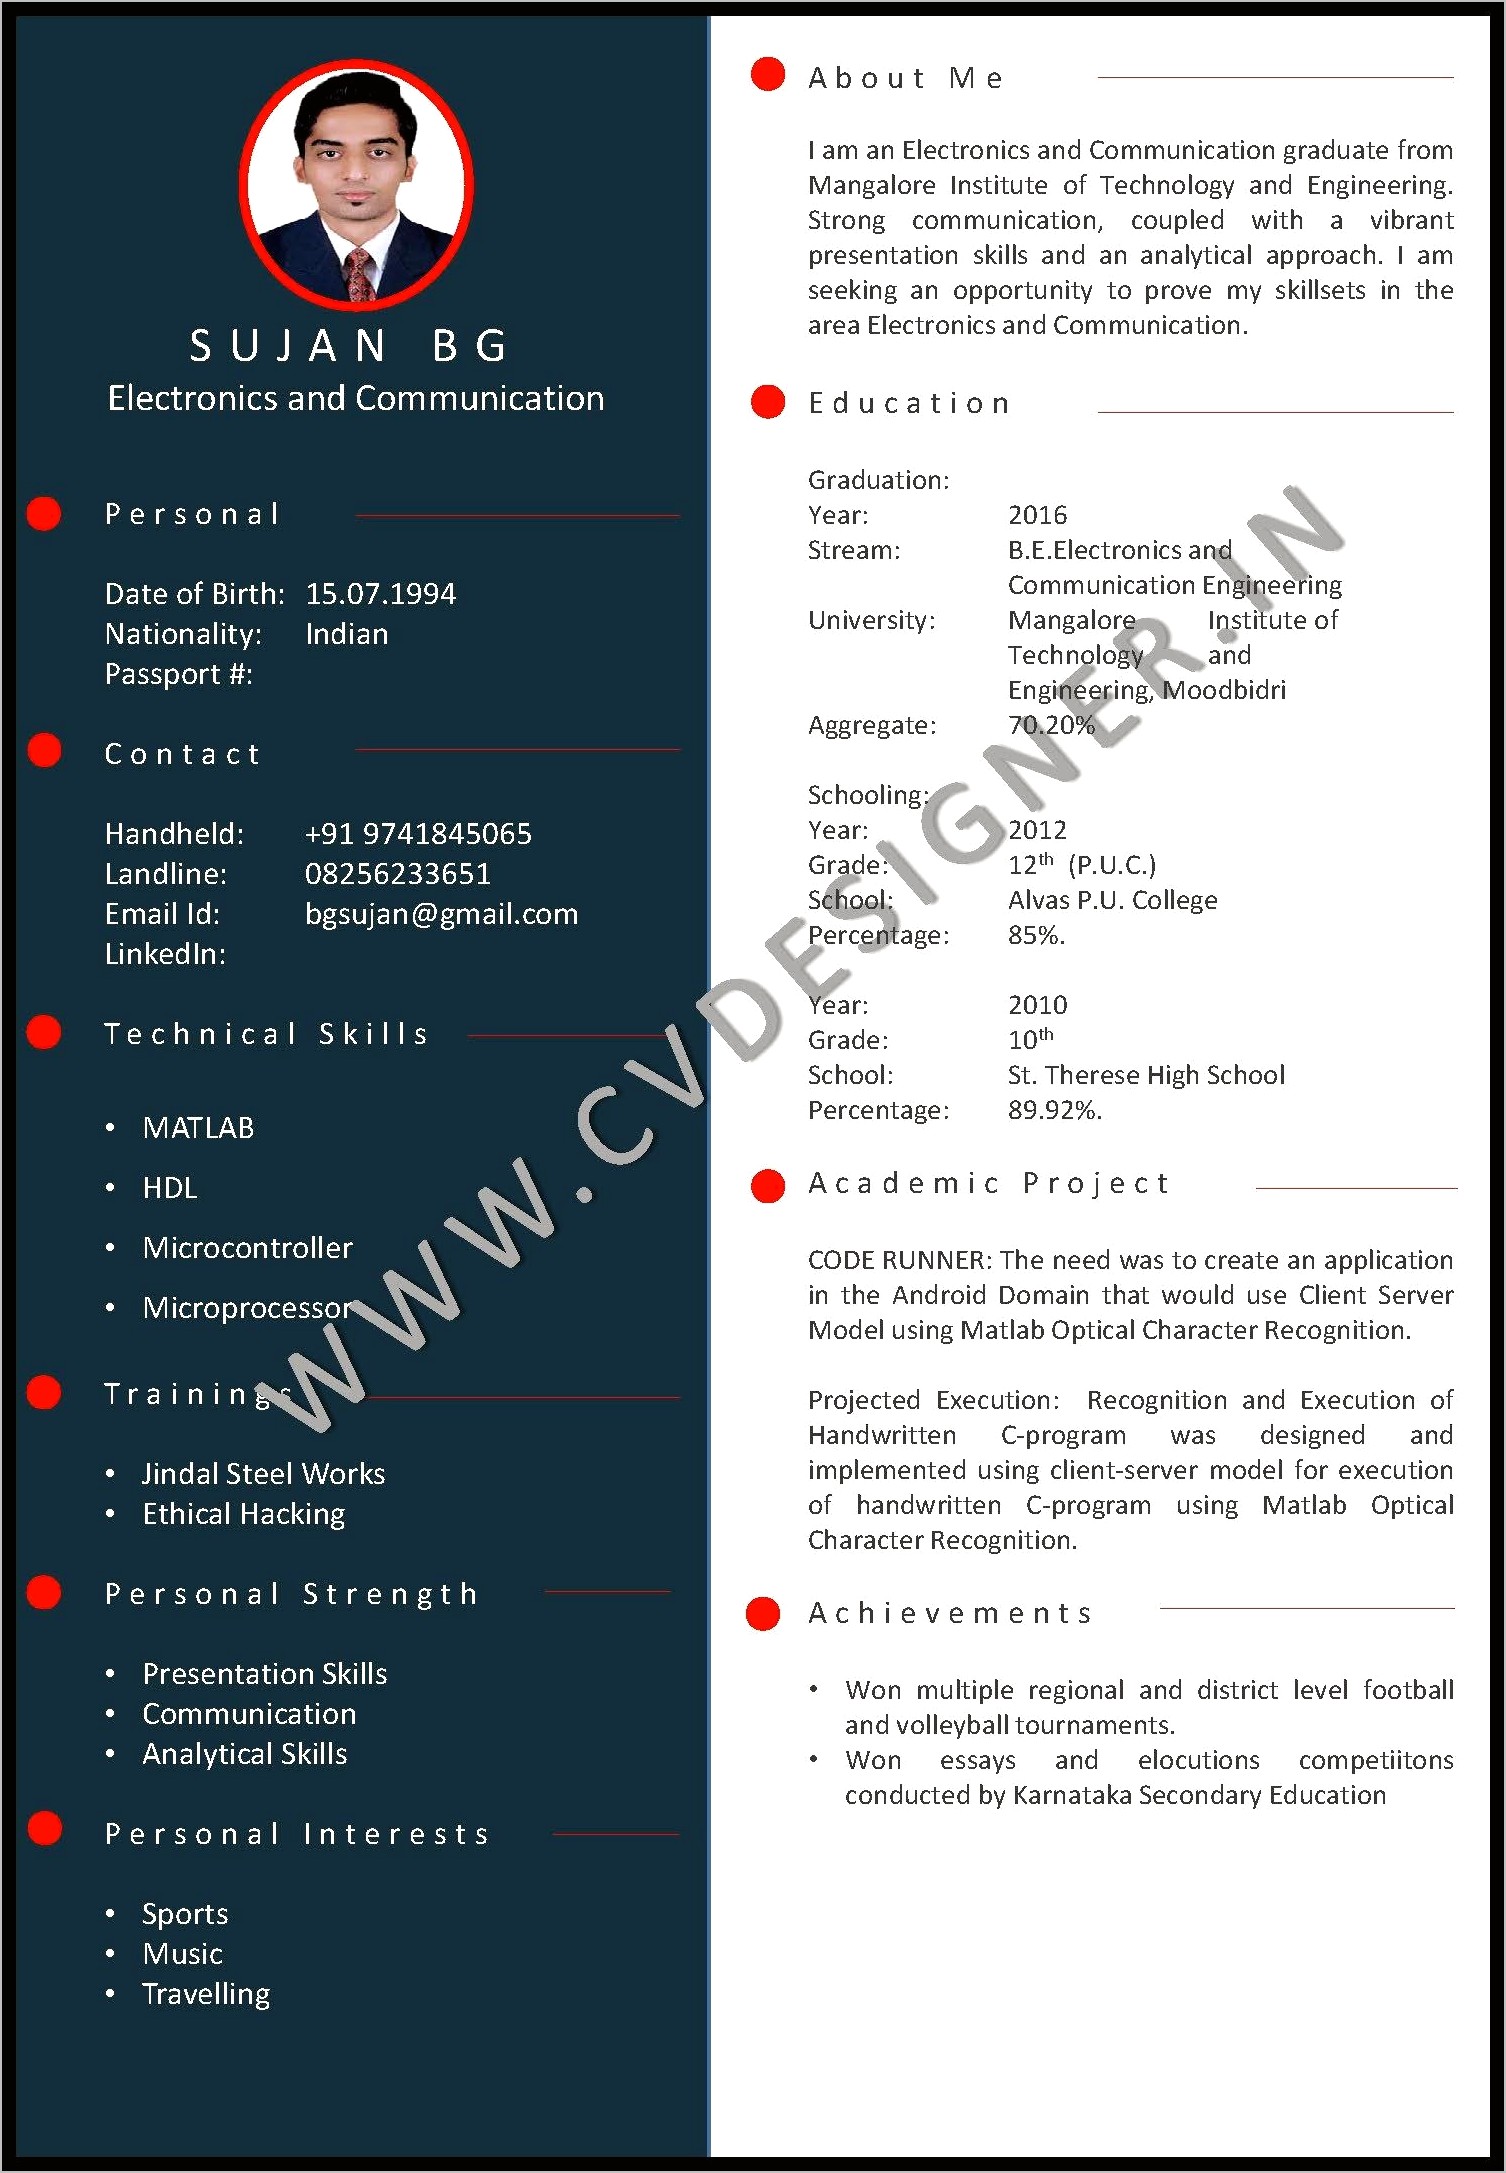 Download Sample Resumes For Cse Freshers